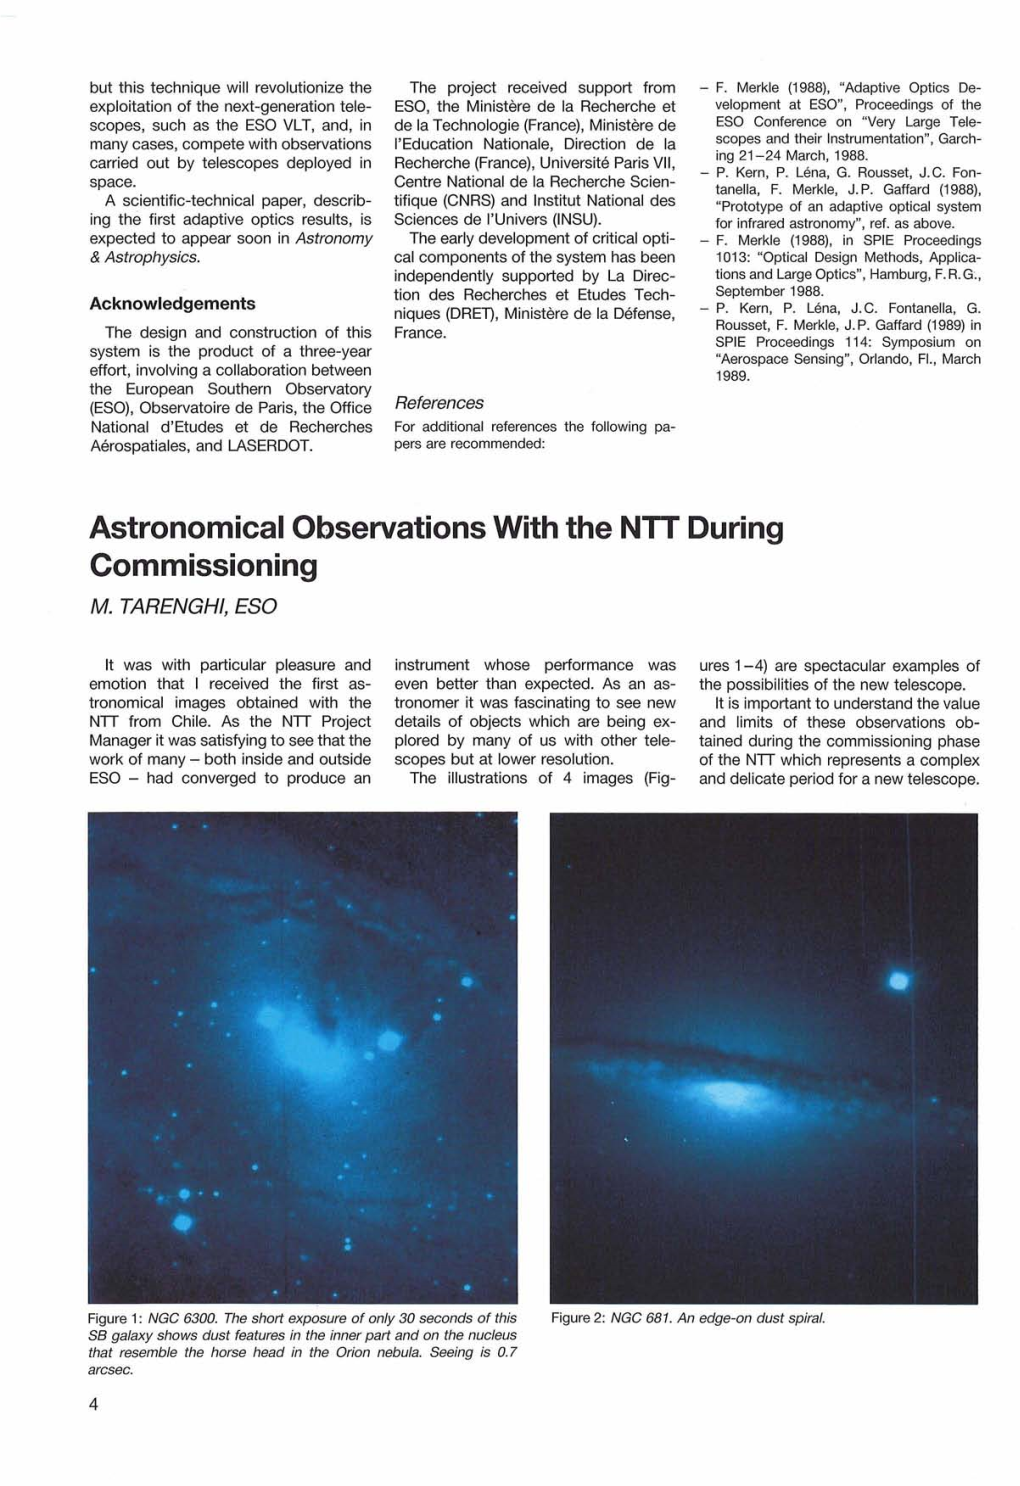 Astronomical Observations with the NTT During Commissioning M